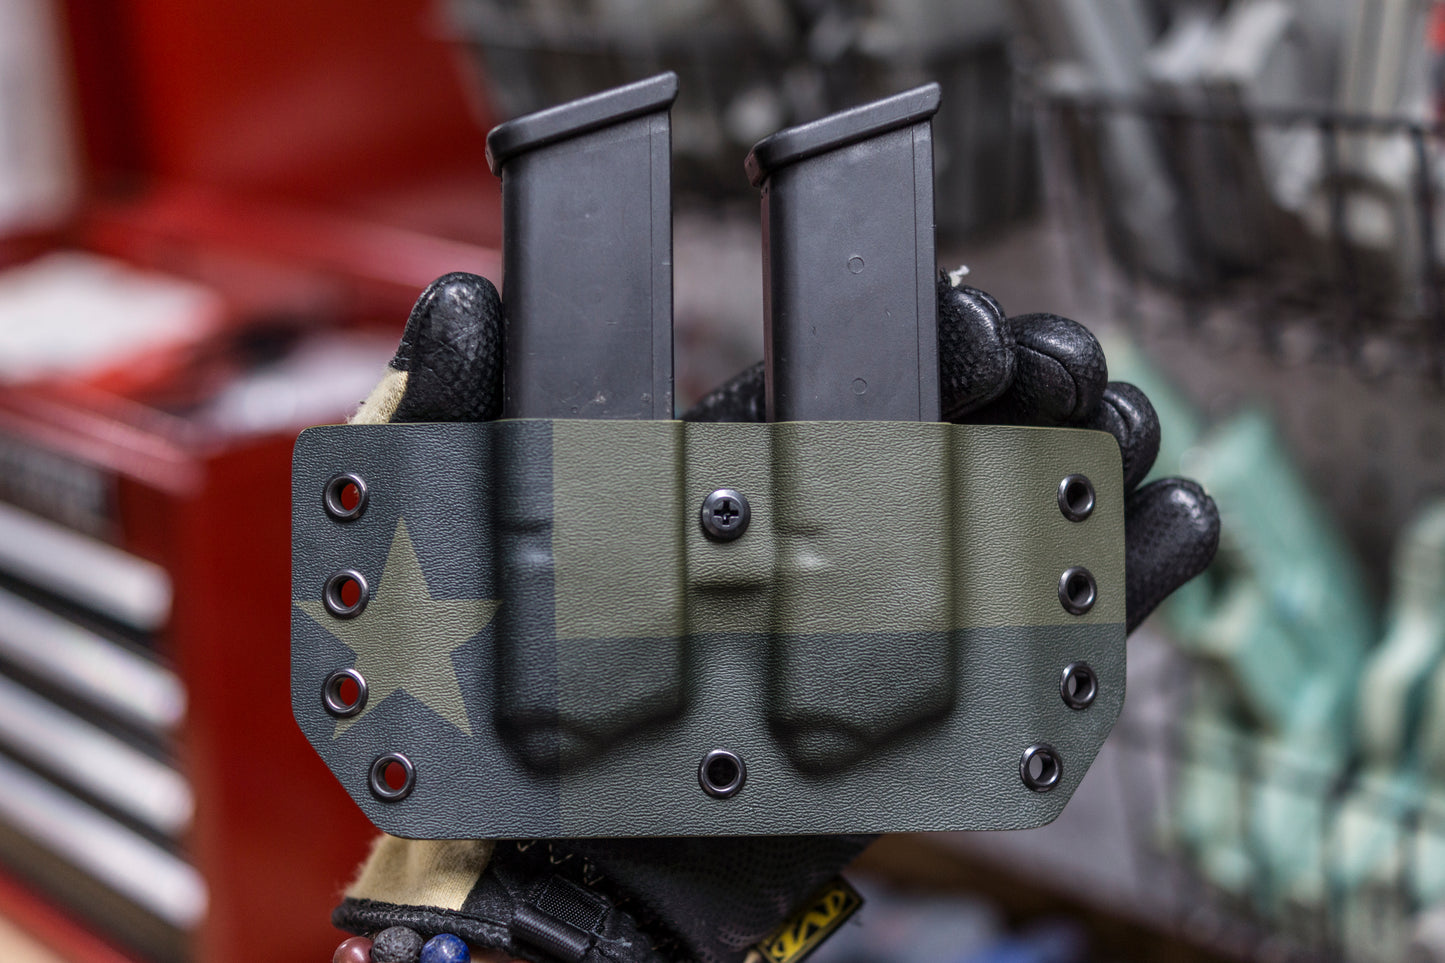 Double Magazine Carrier for a Glock in OD Green Texas Flag.